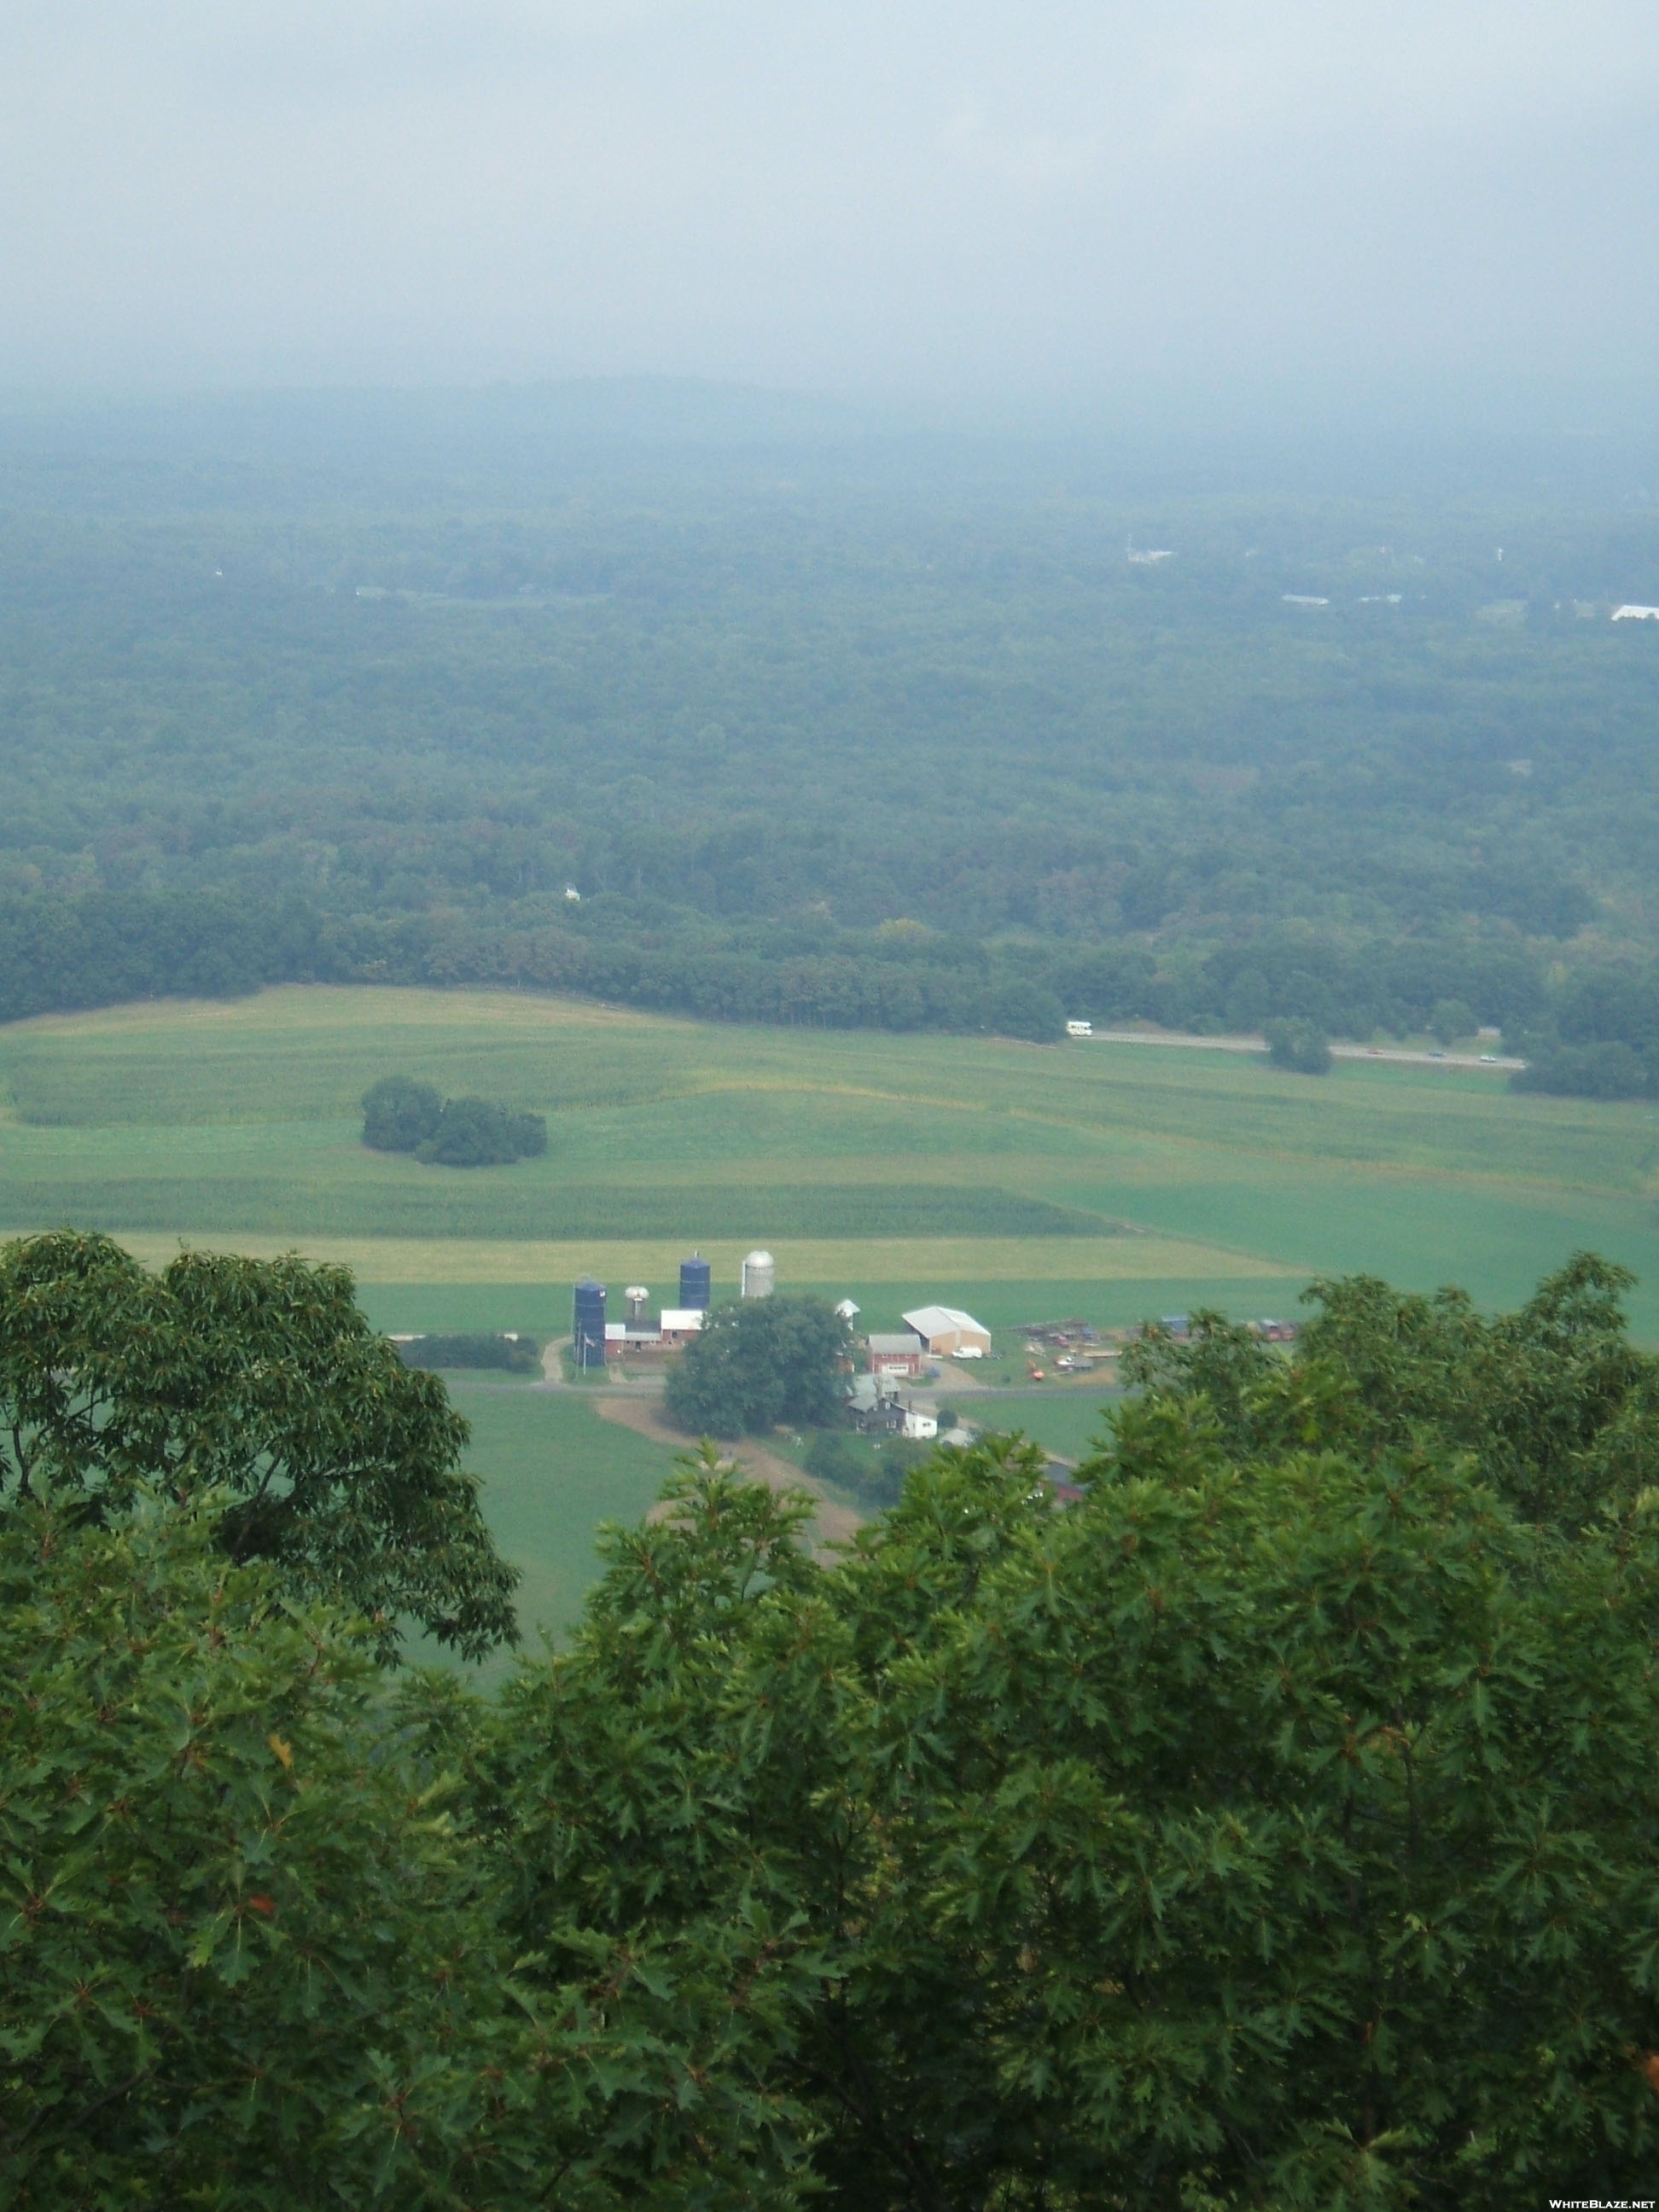 Farm by Taconic parkway from Hosnar Mt